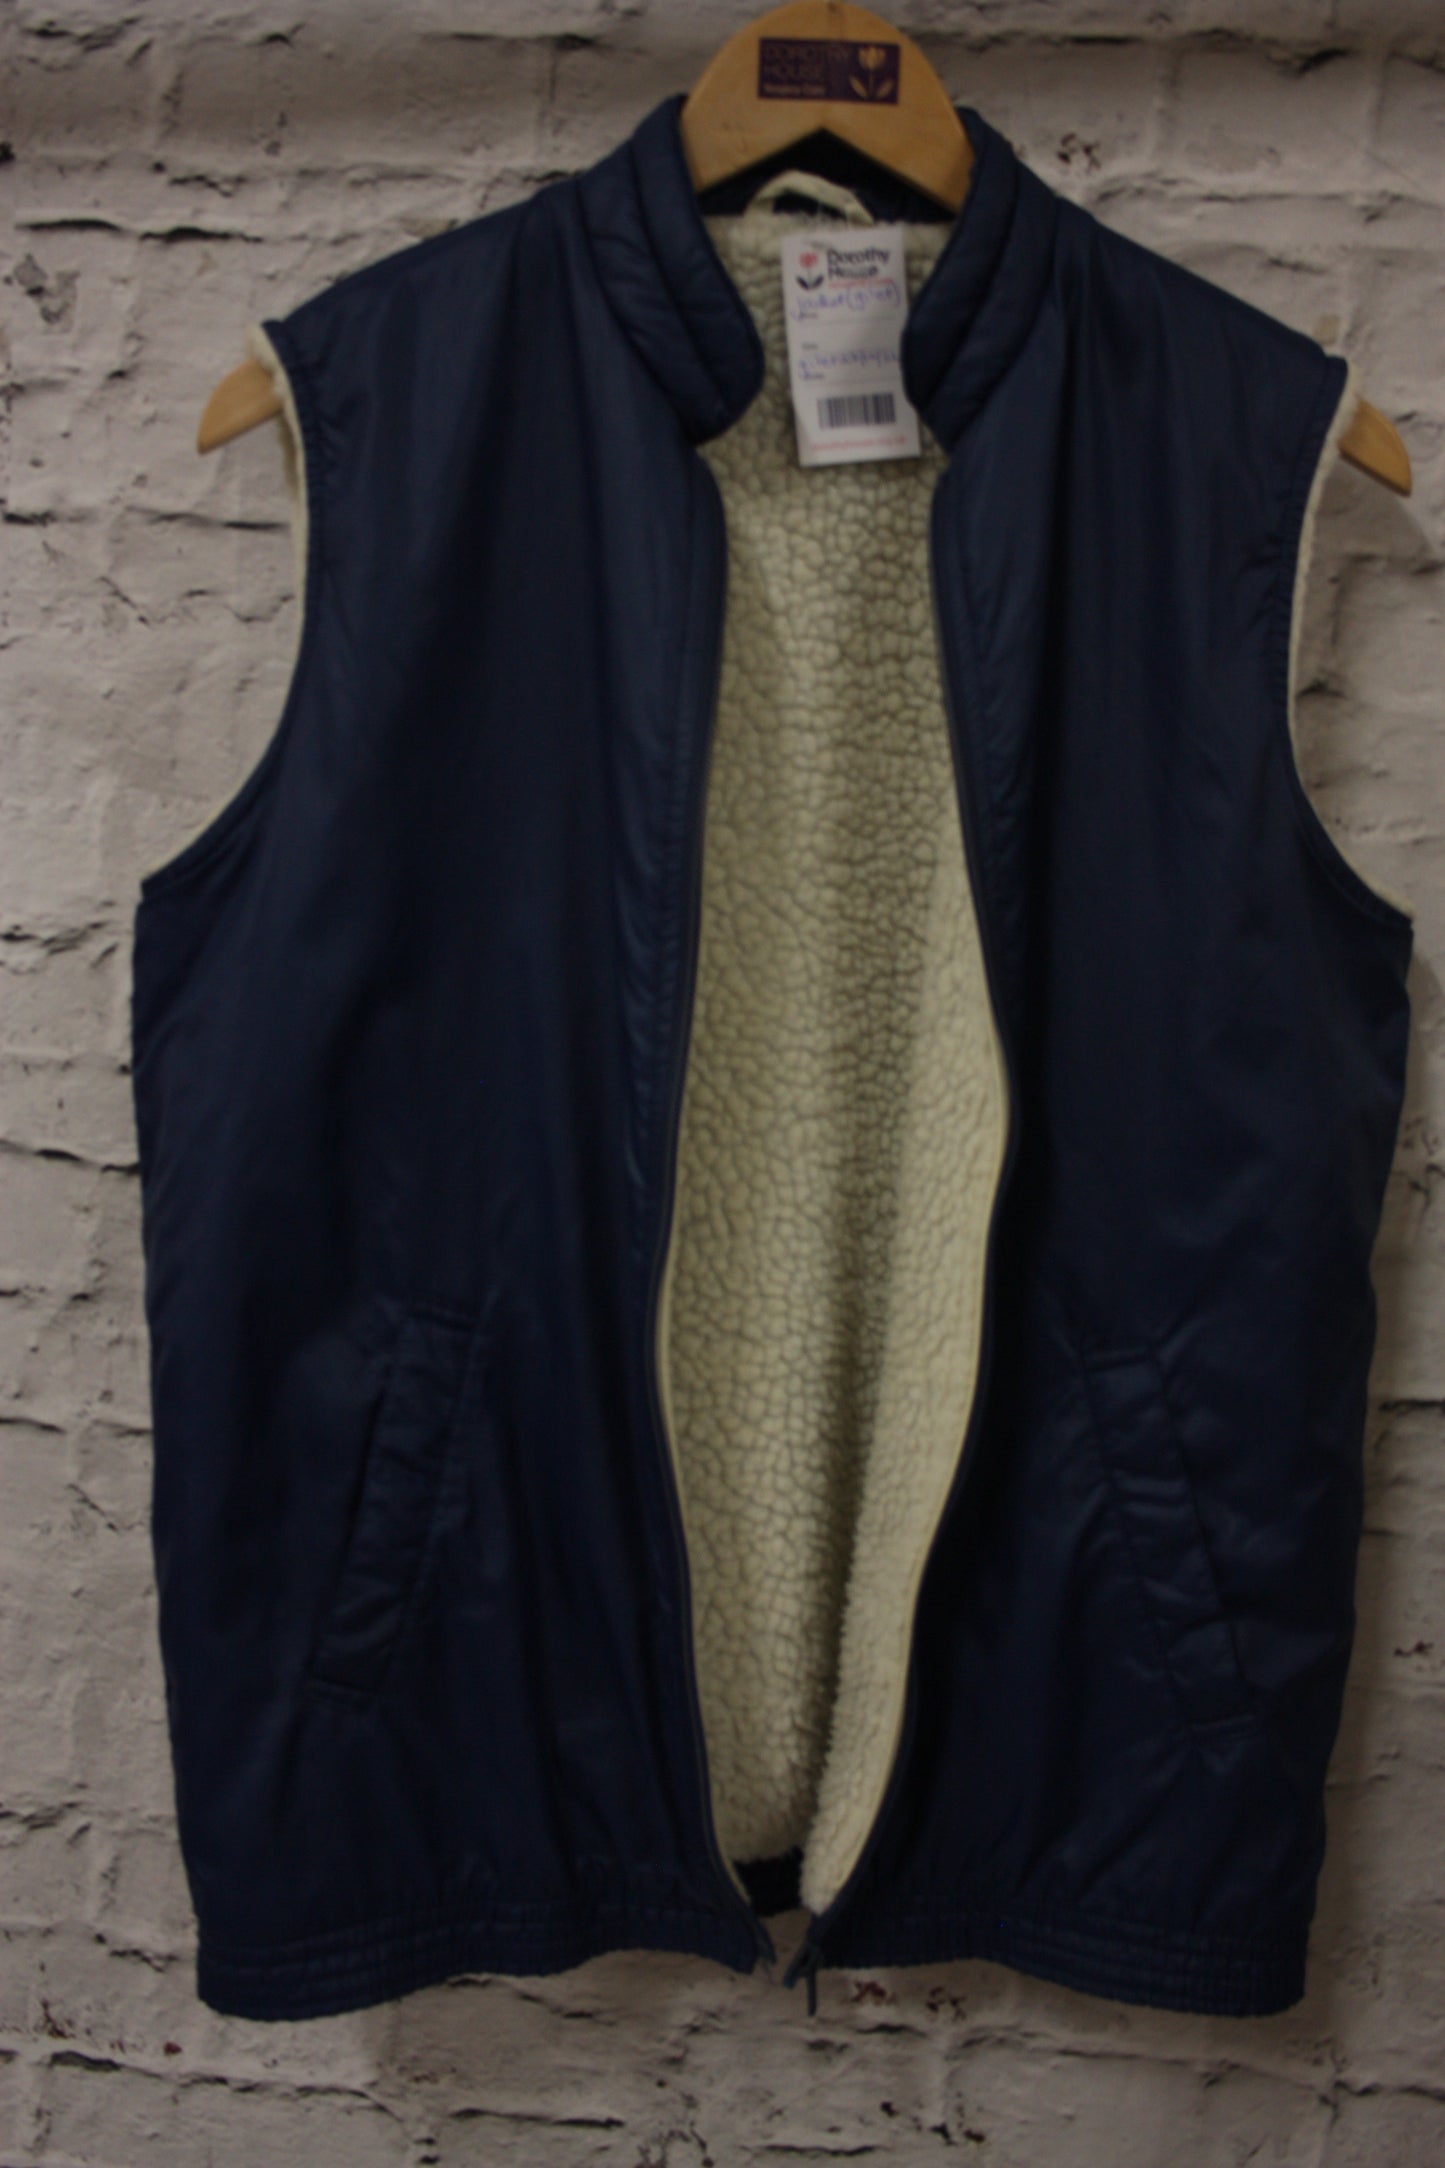 Vintage Blue Gilet with Fleece Lining Size 6-8